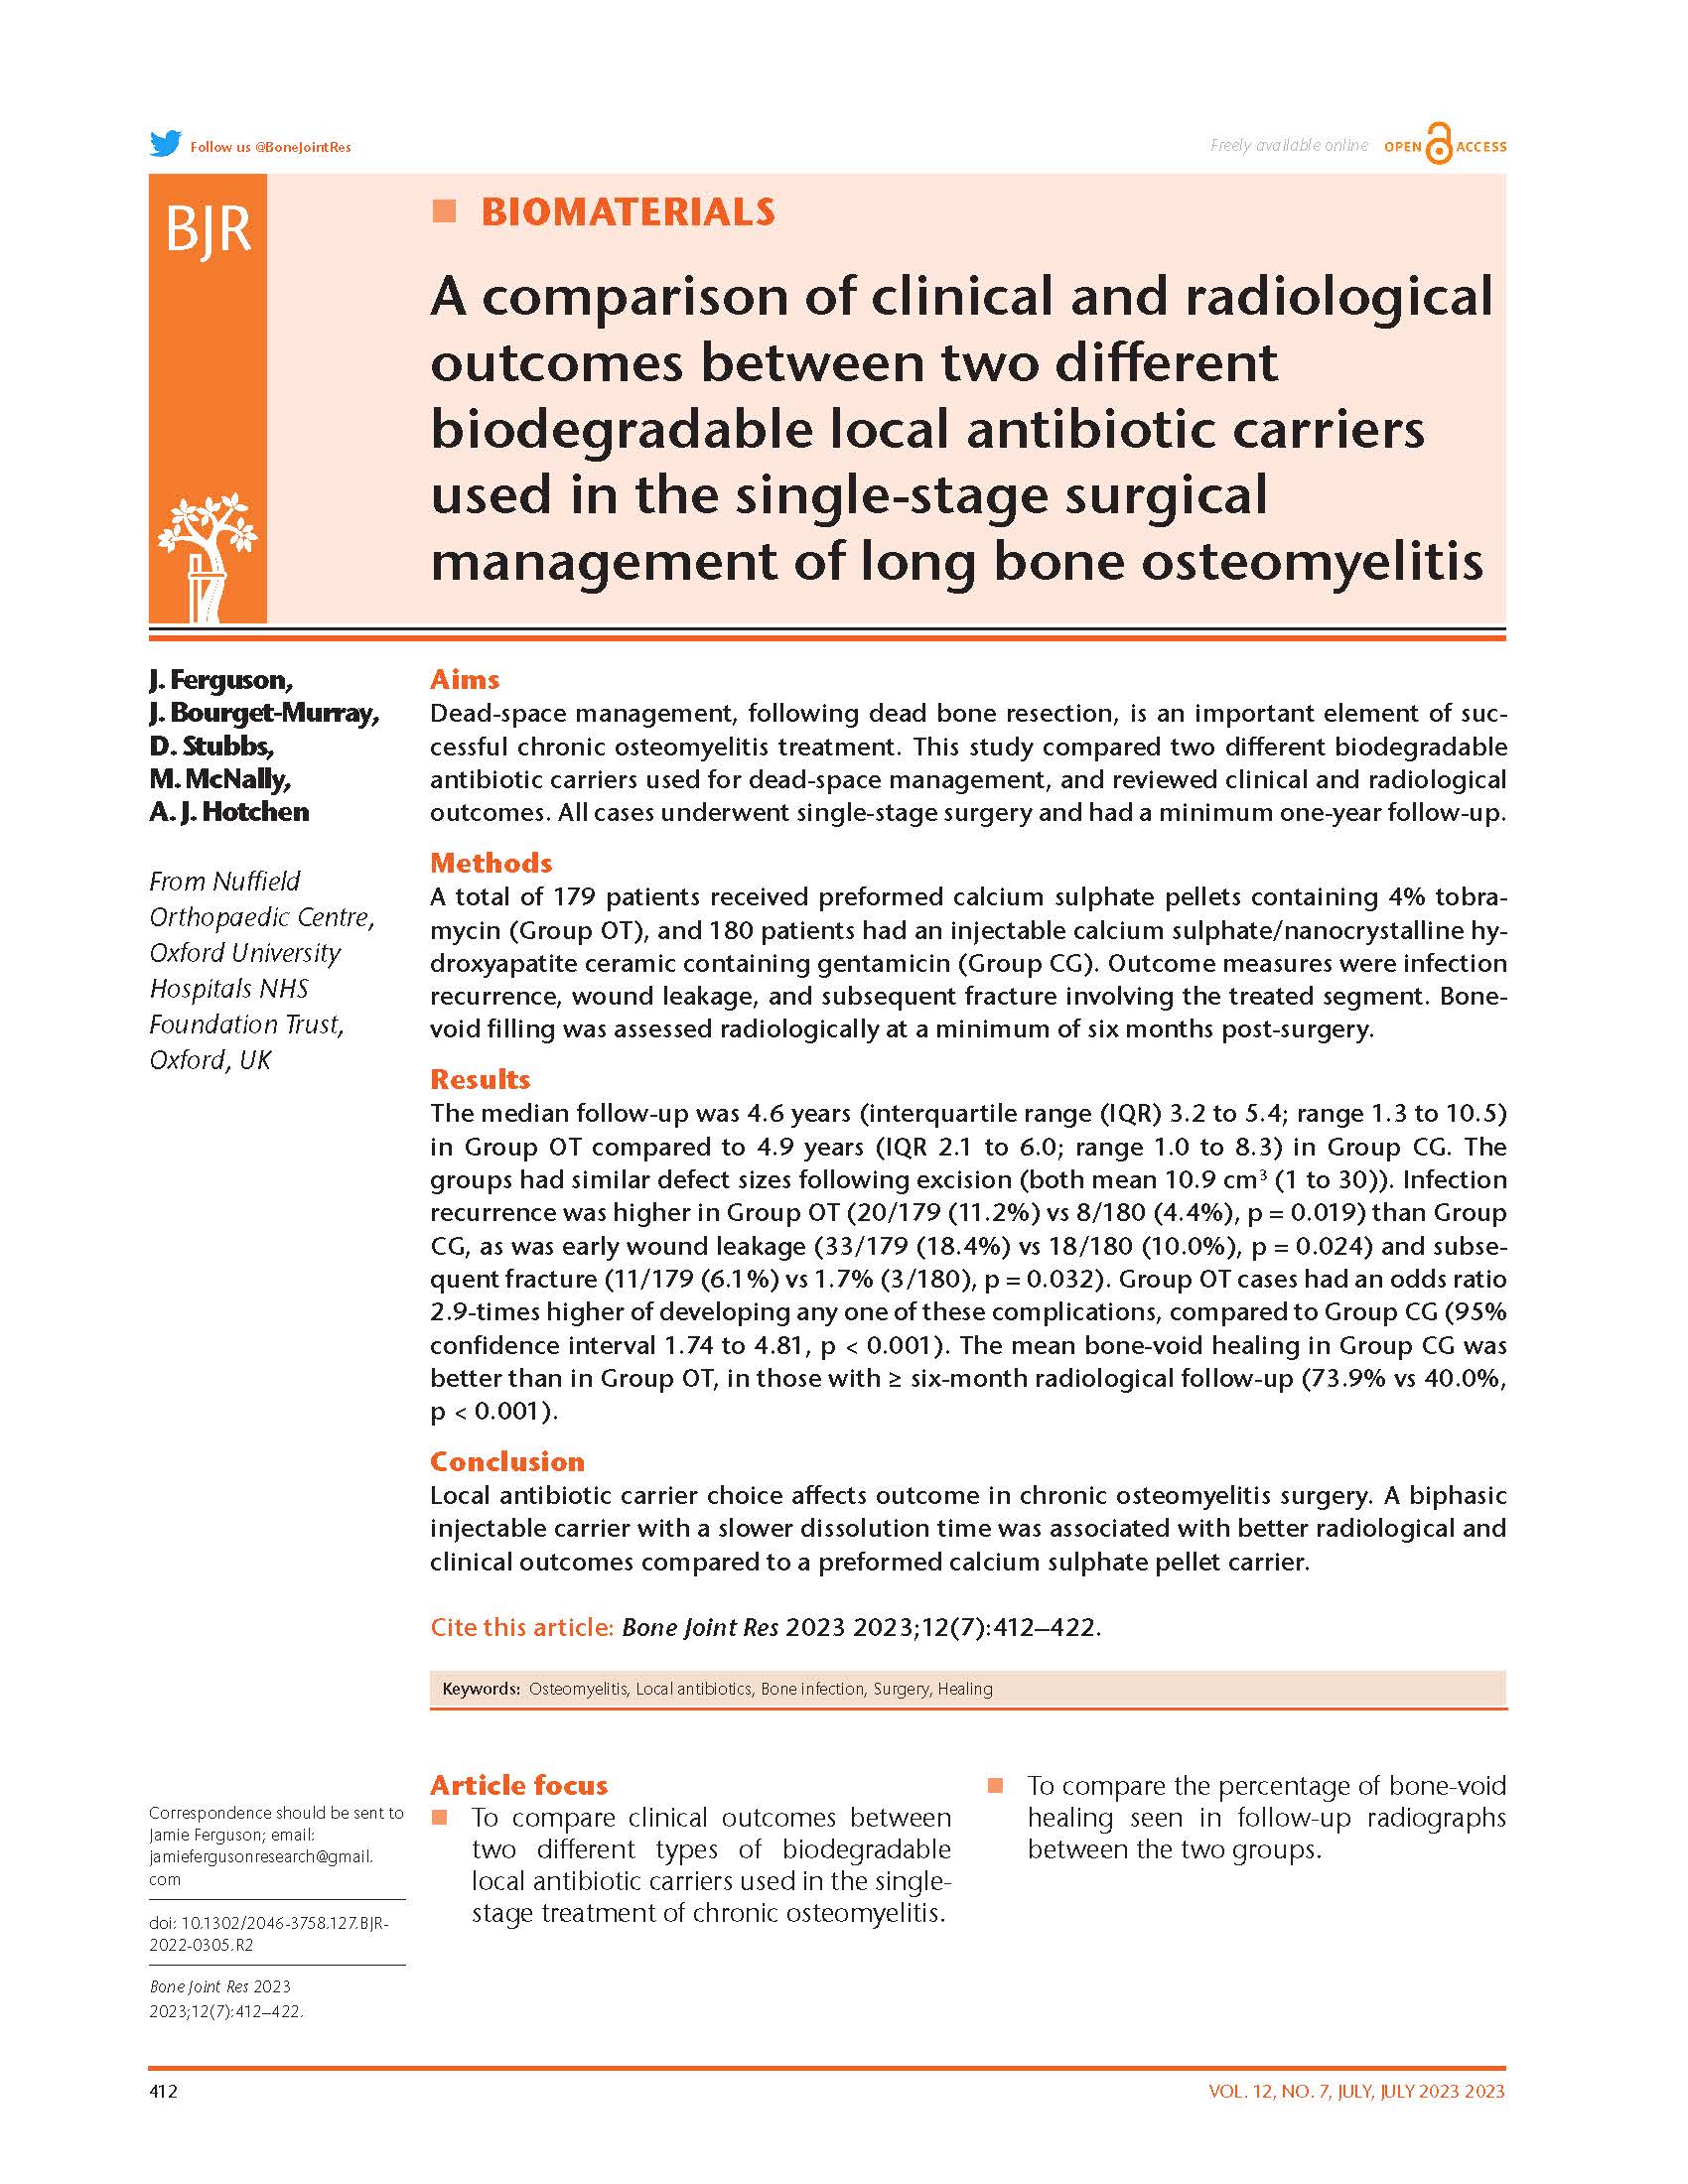 A comparison of clinical and radiological outcomes between two different biodegradable local antibiotic carriers used in the single-stage surgical management of long bone osteomyelitis